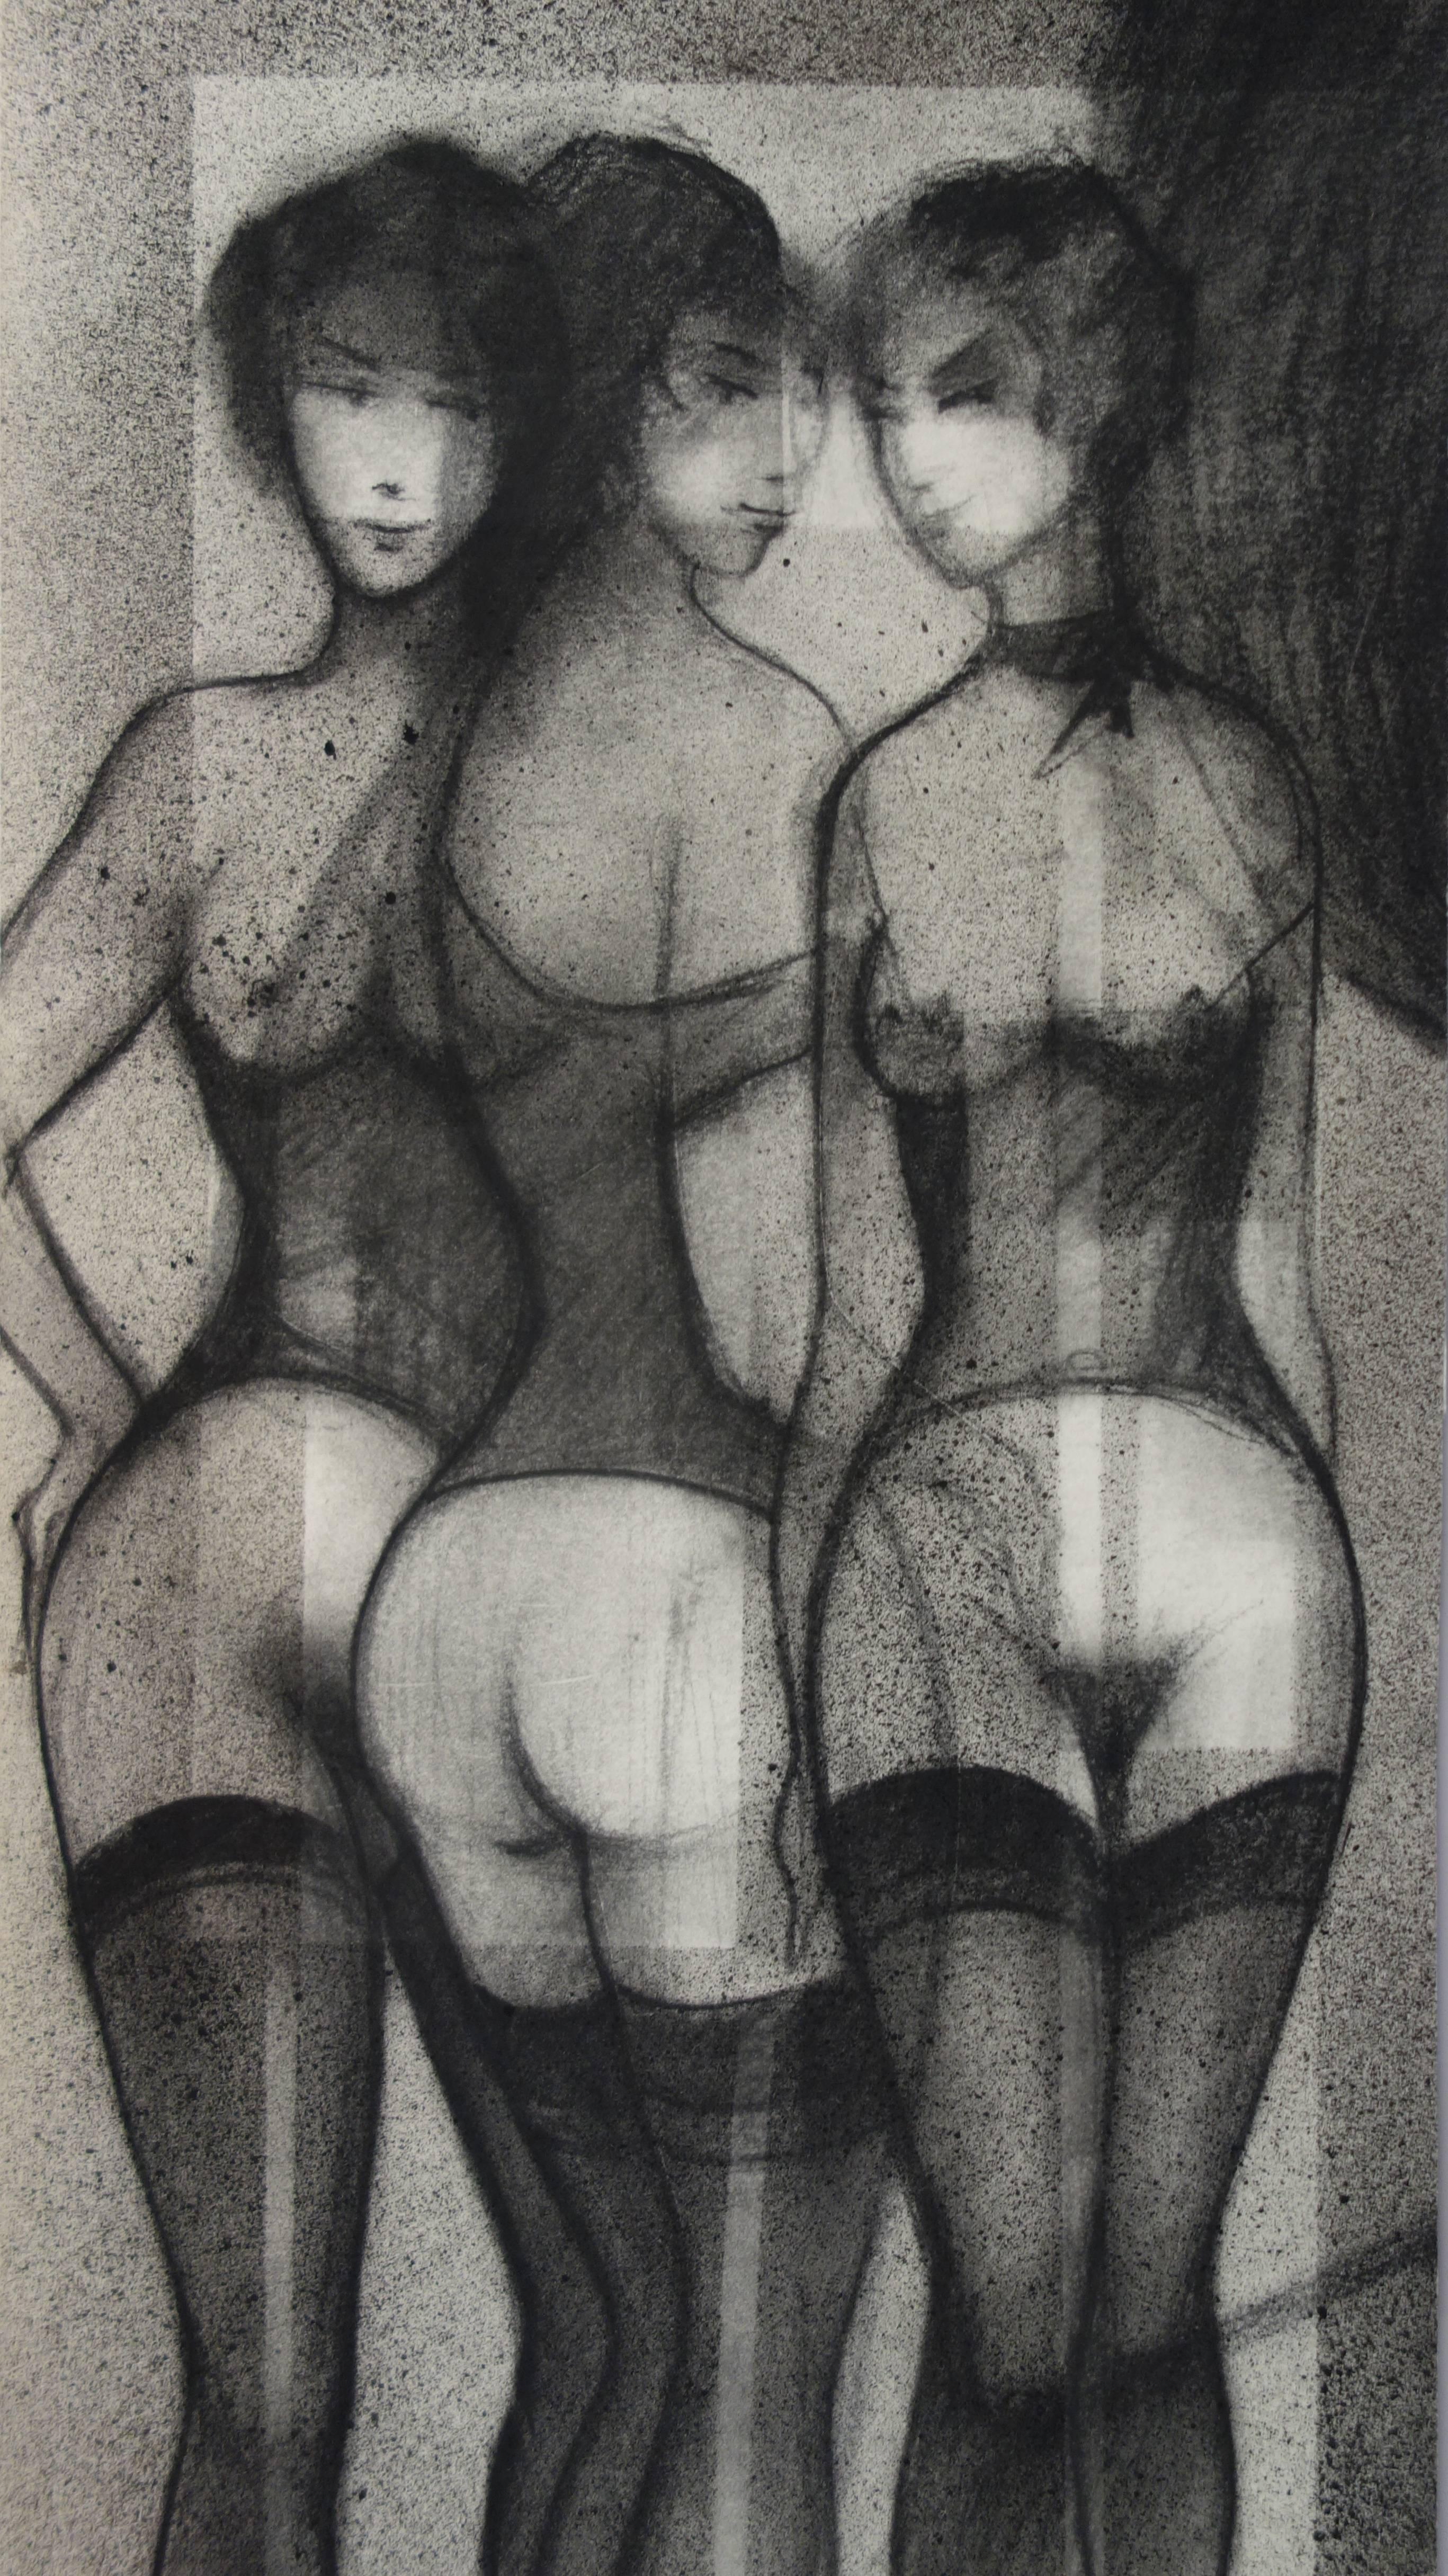 Three Graces with Garters - Original Signed Charcoal Drawing - 1991 - Realist Art by Sacha Chimkevitch